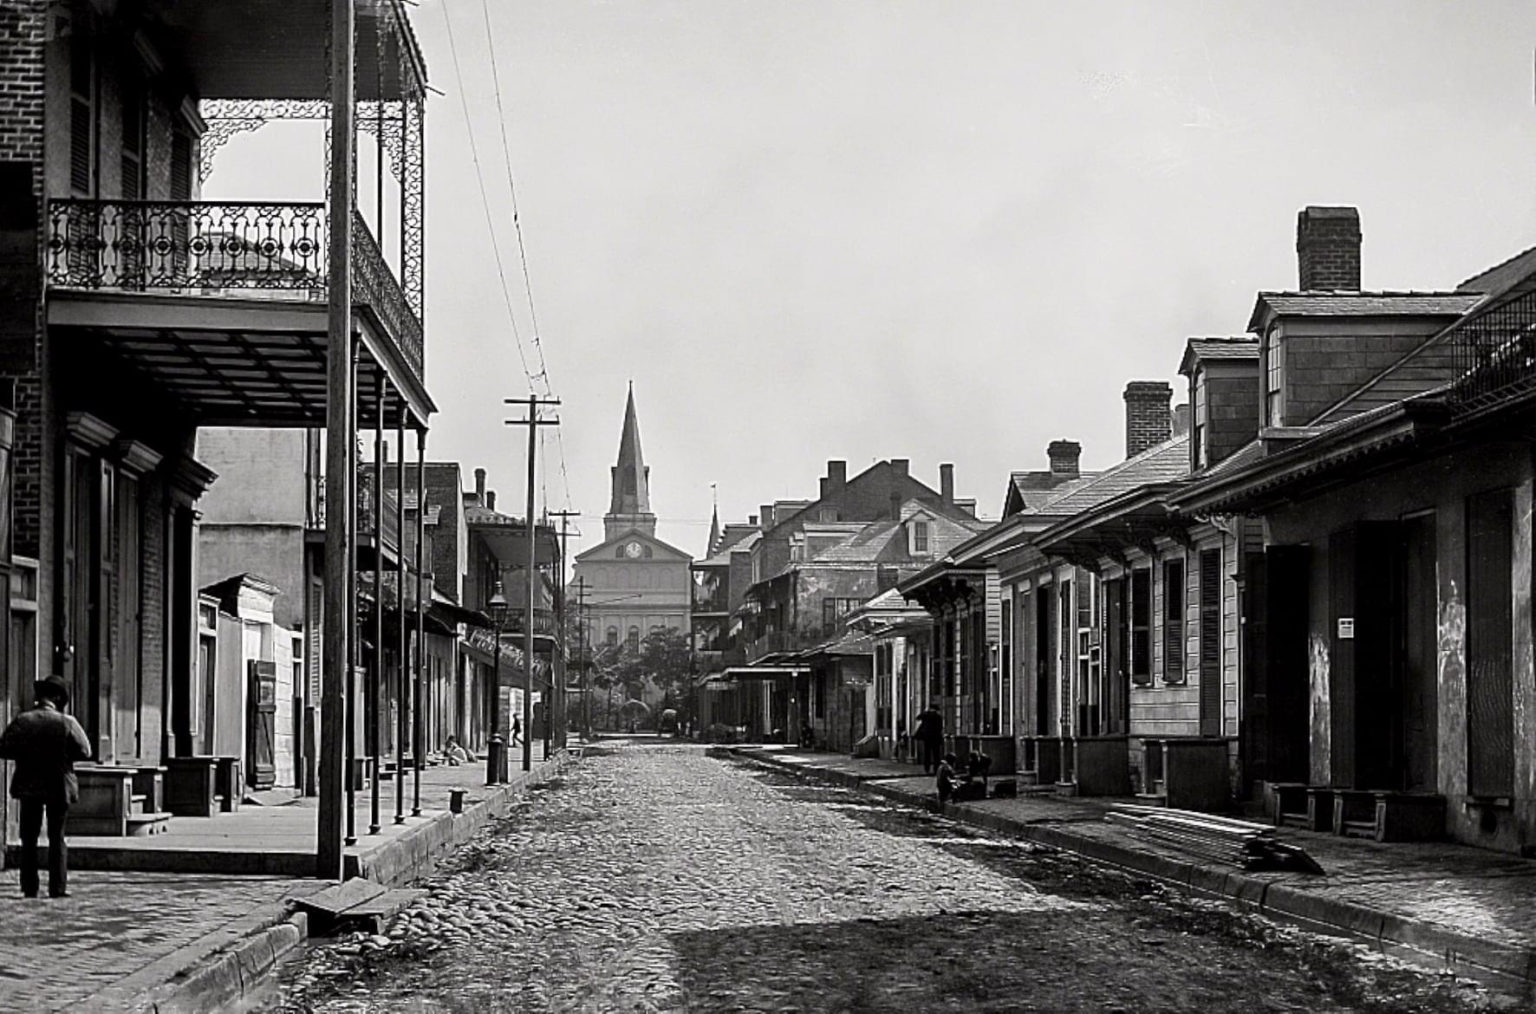 Orleans Street near Cathedral of St. Louis, c. 1890